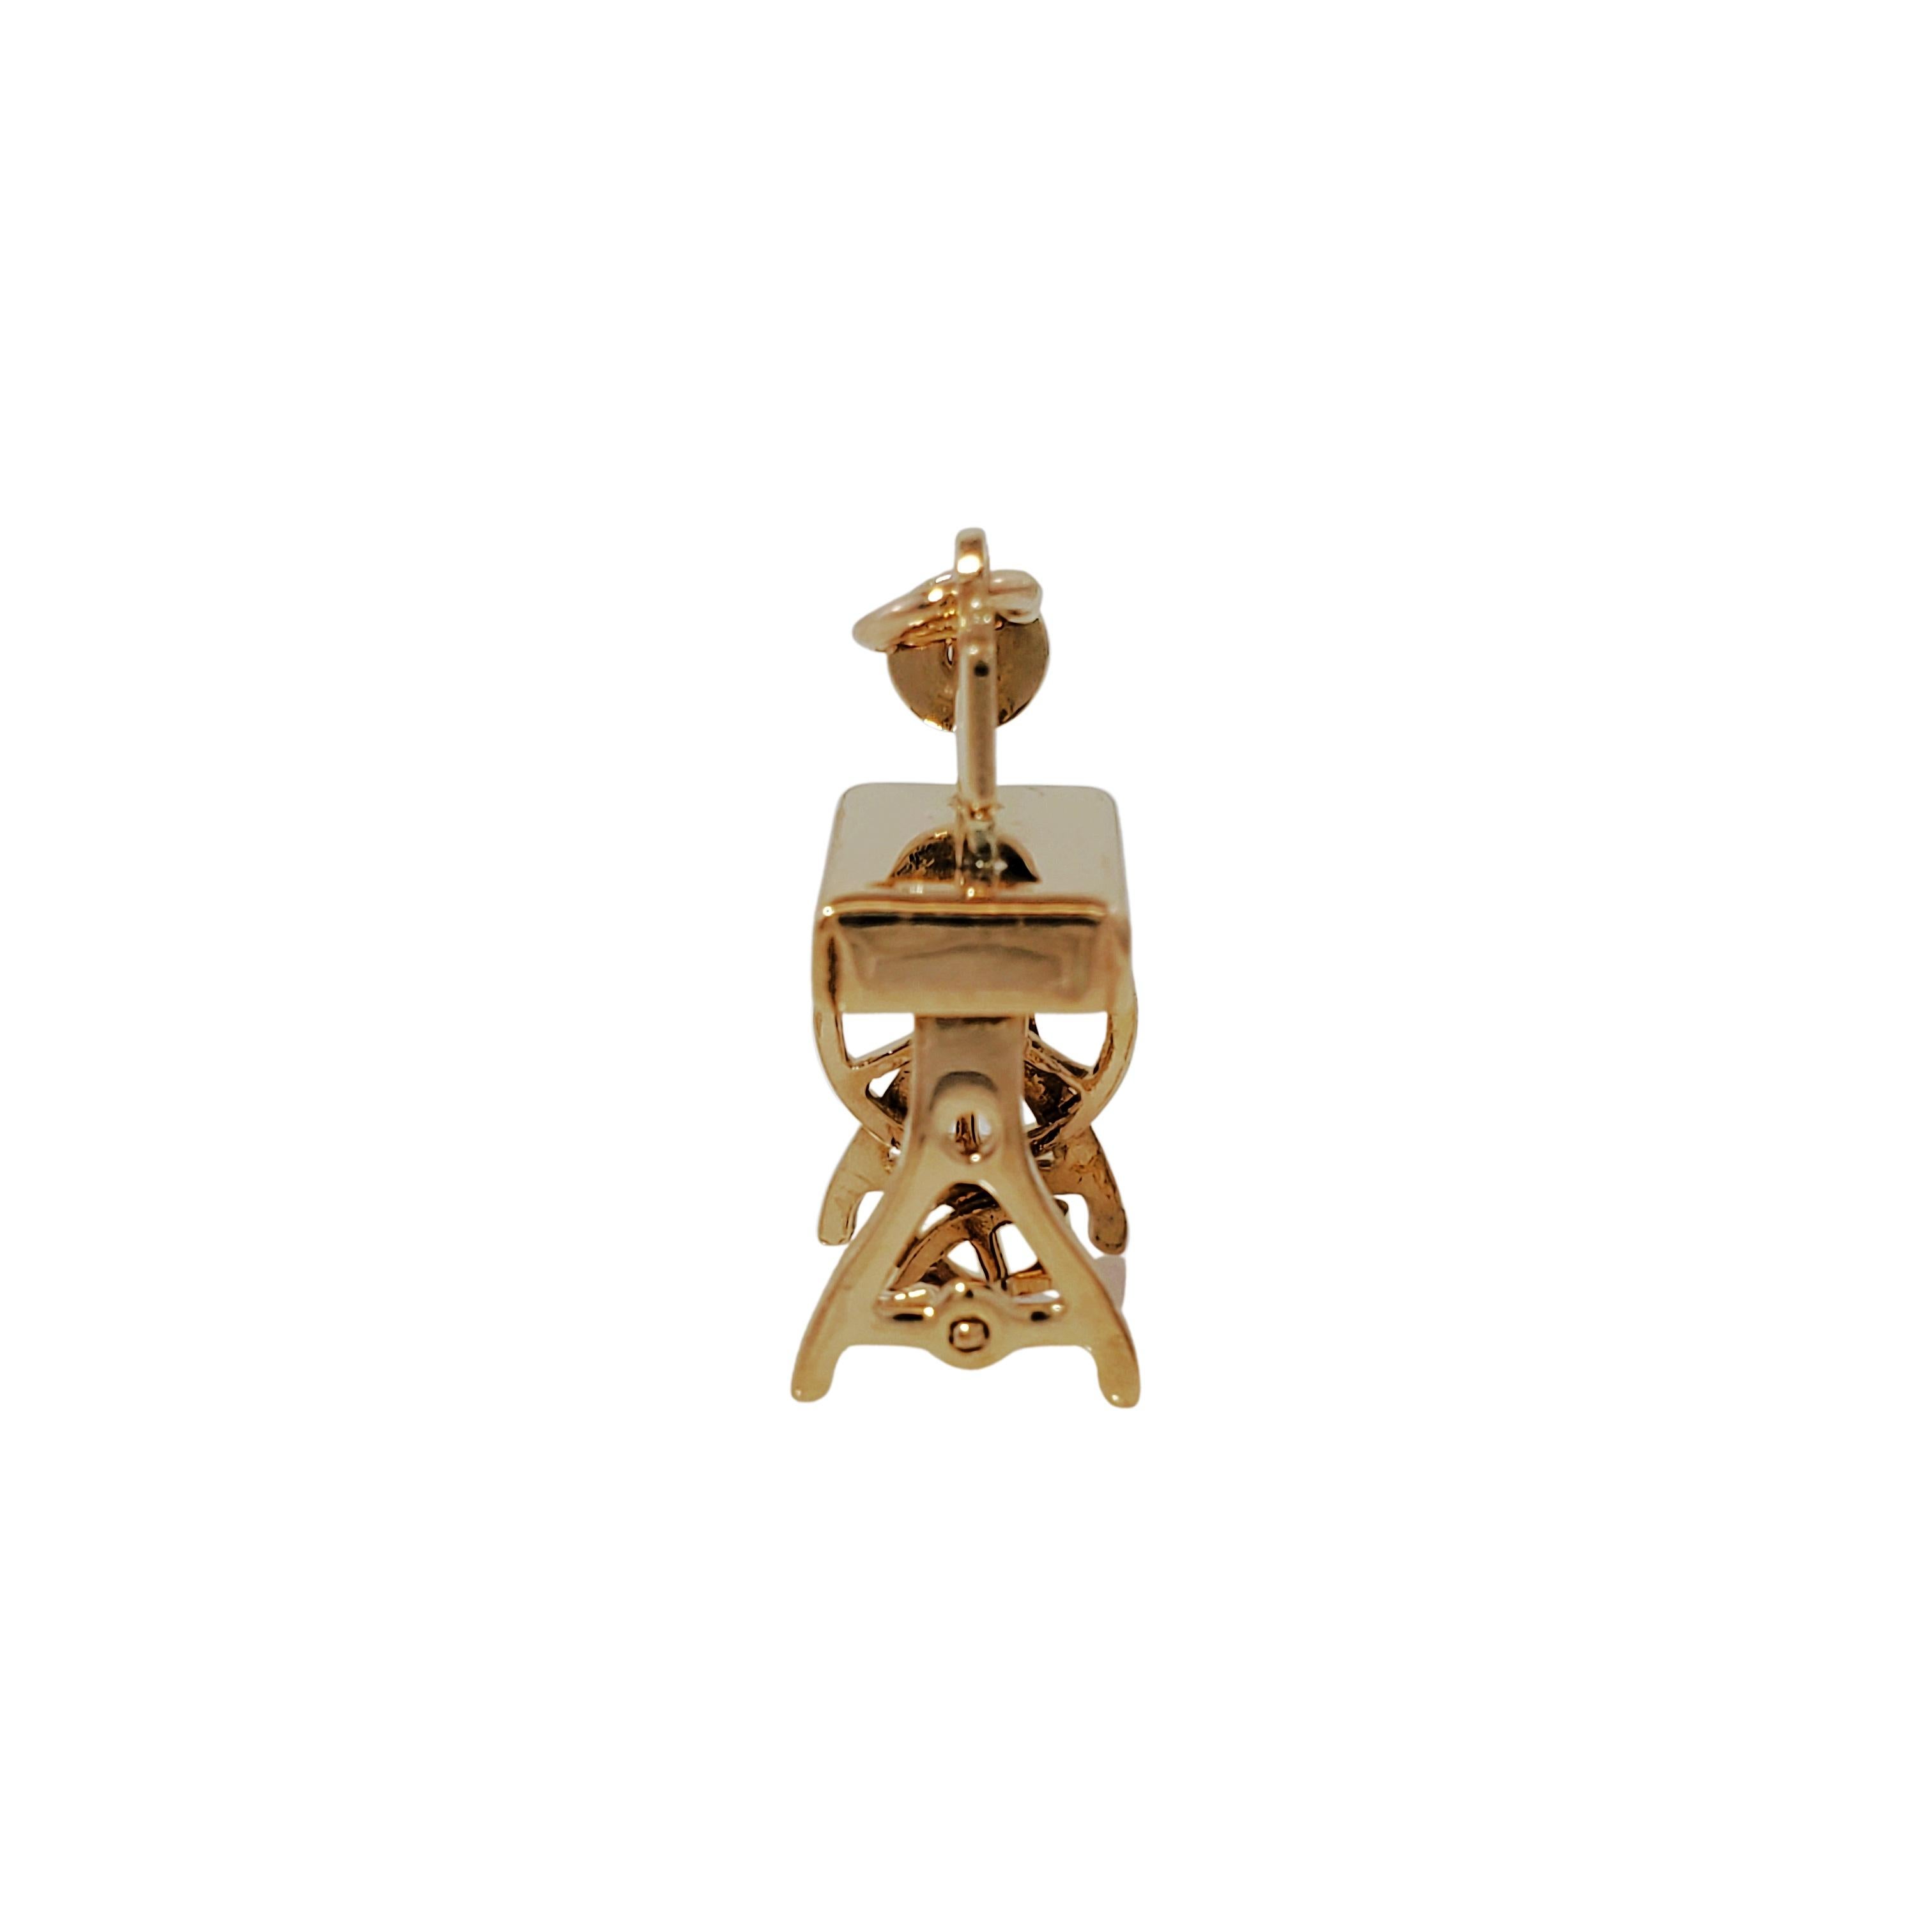 14K Yellow Gold Sewing Machine Charm

Adorable 3D sewing machine charm is crafted in 14k yellow gold and features machanical wheels and foot peddle.

Size: 19mm X 12mm

Weight: 2.4 gr/ 1.5 dwt

Hallmark: 14K

Will be wrapped securely in a gift box